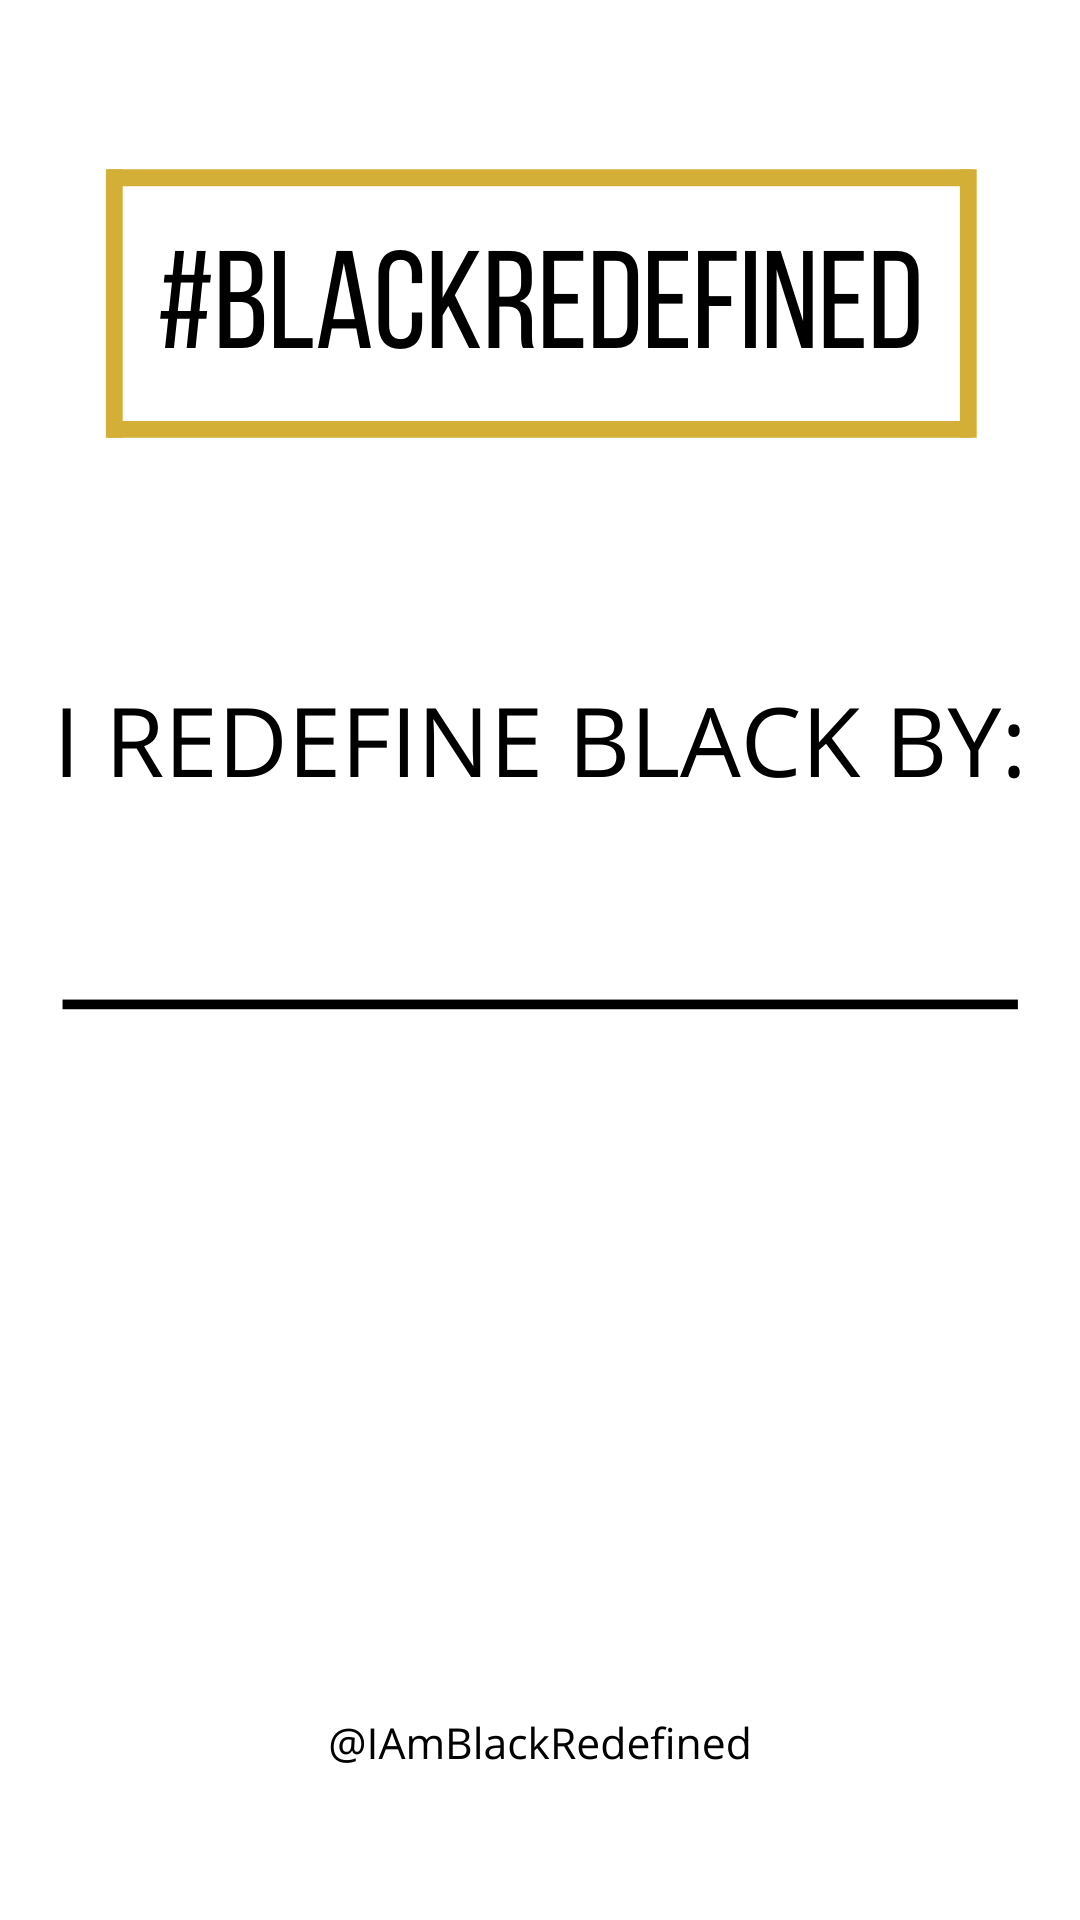 I+Am+Black+Redefined+Story+Template.png